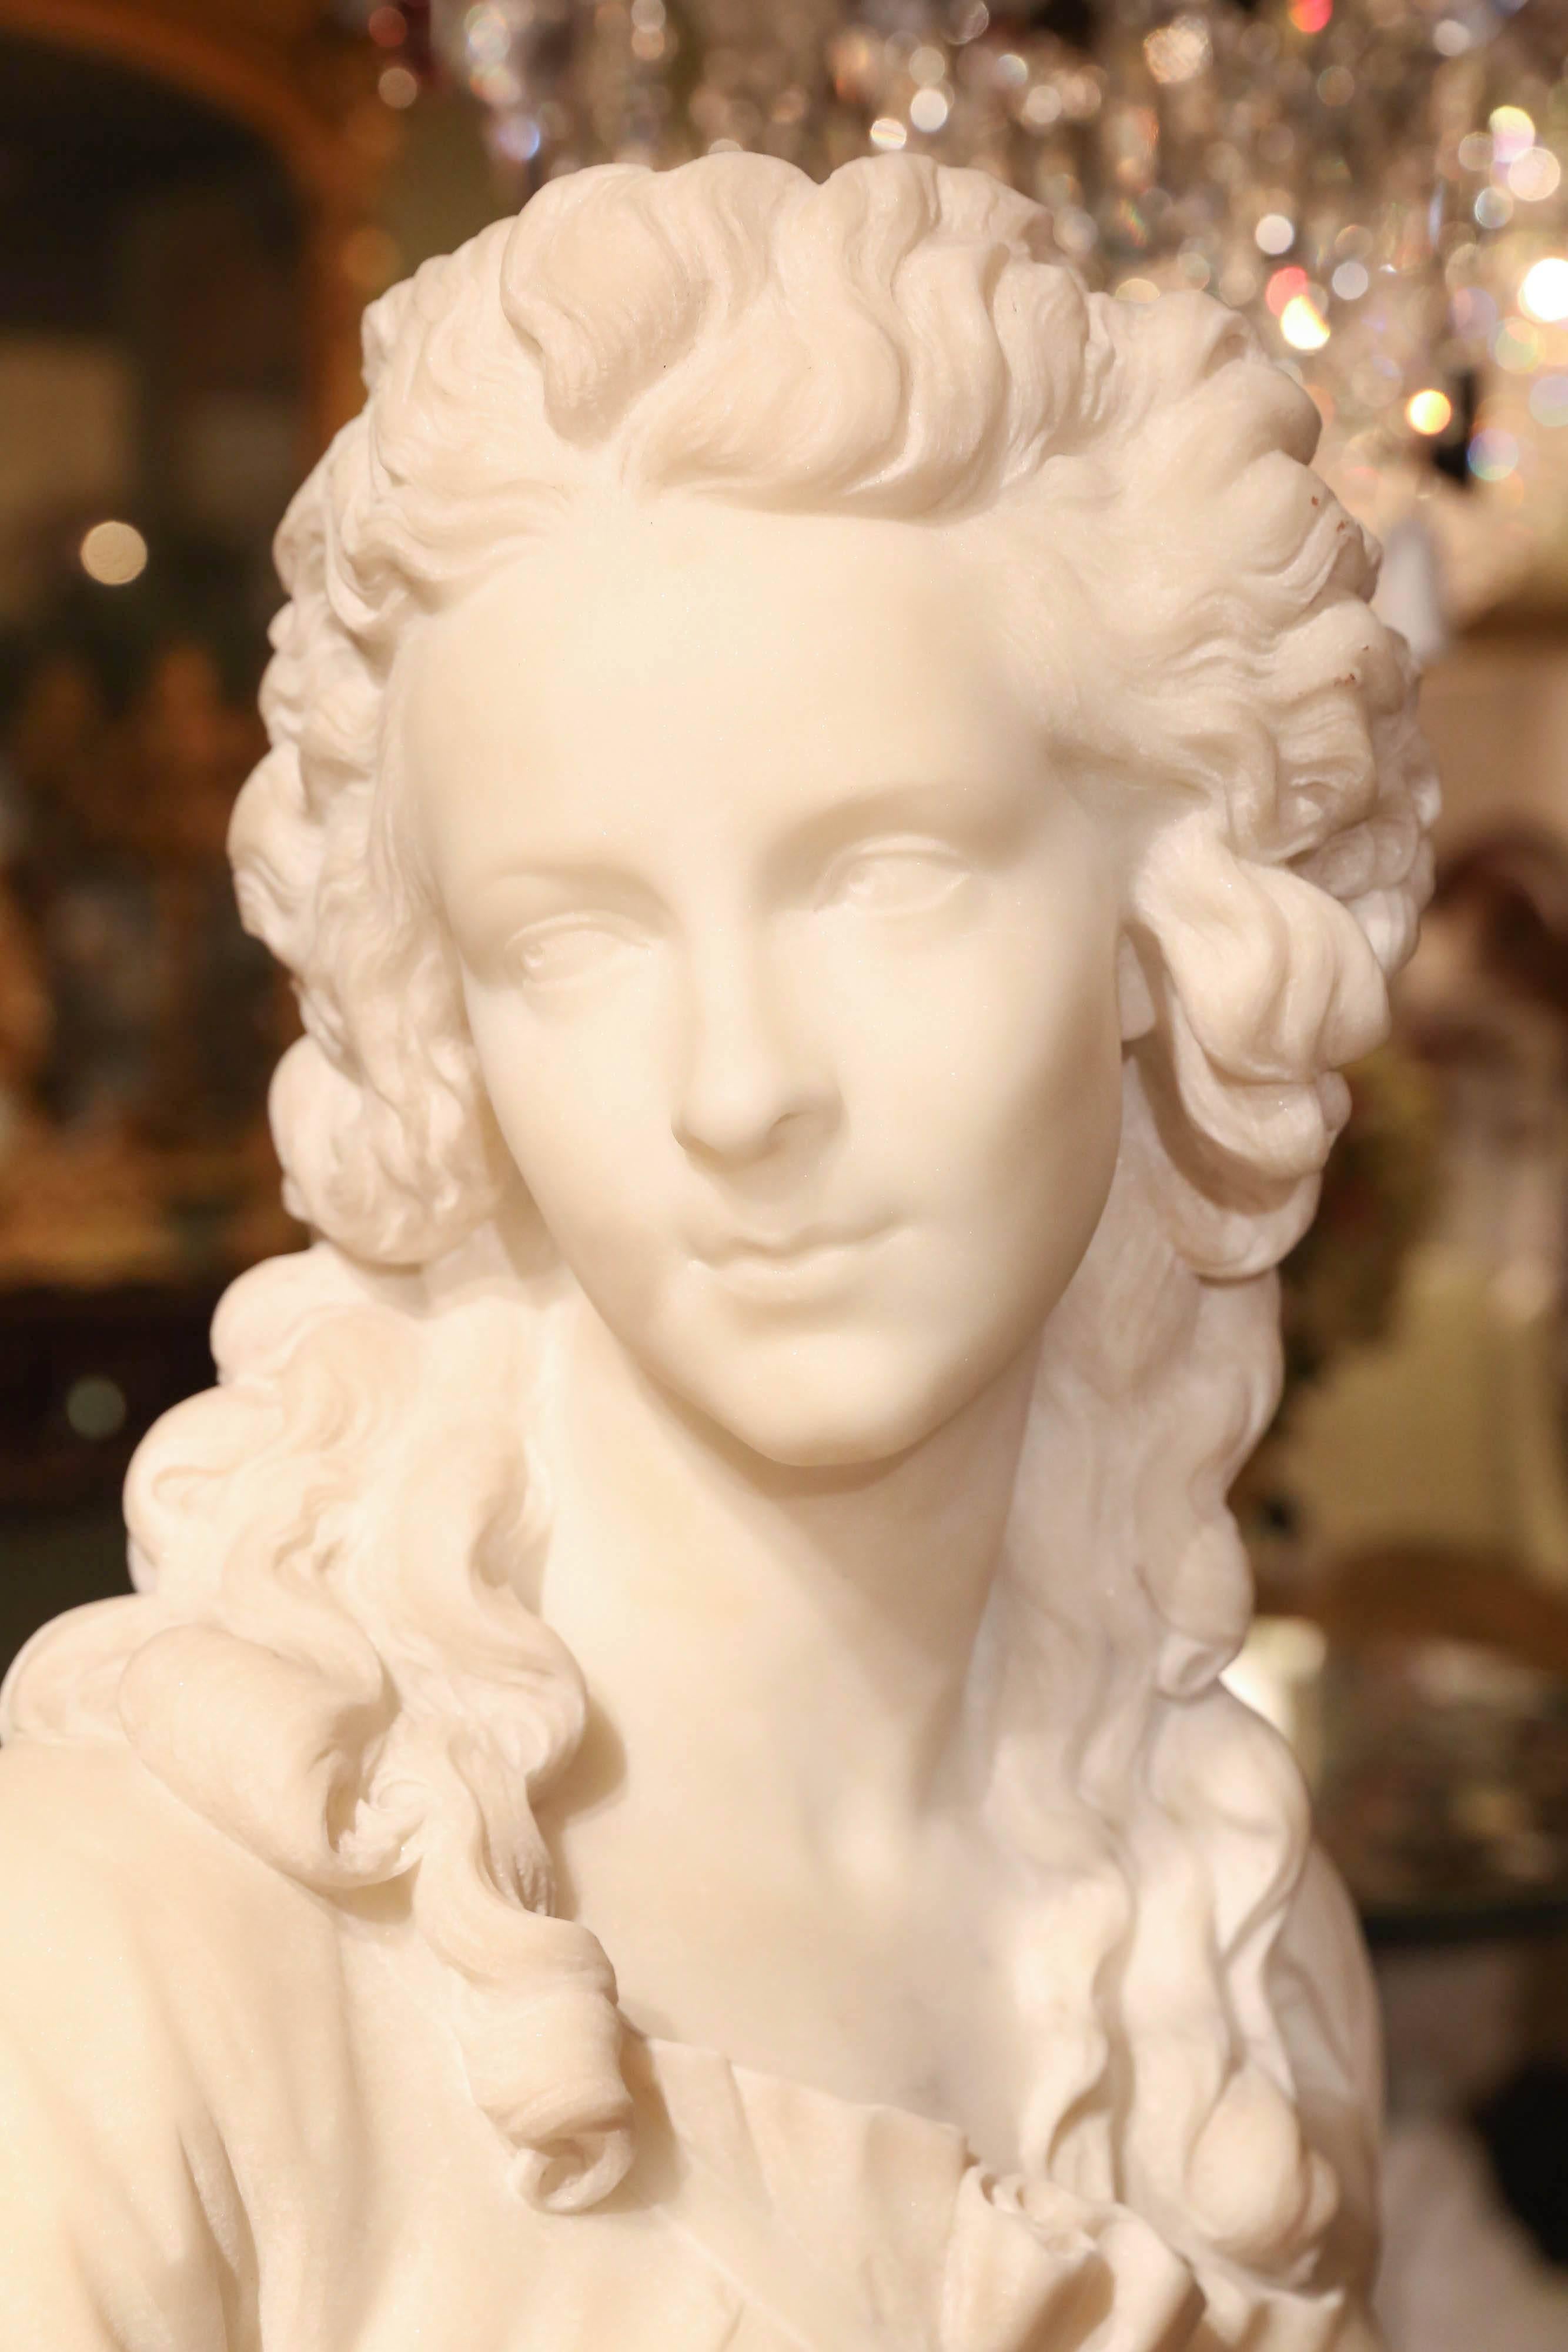 White Carrara marble bust of a French woman, 19th century.
Beautifully carved face with lovely features and long hair.